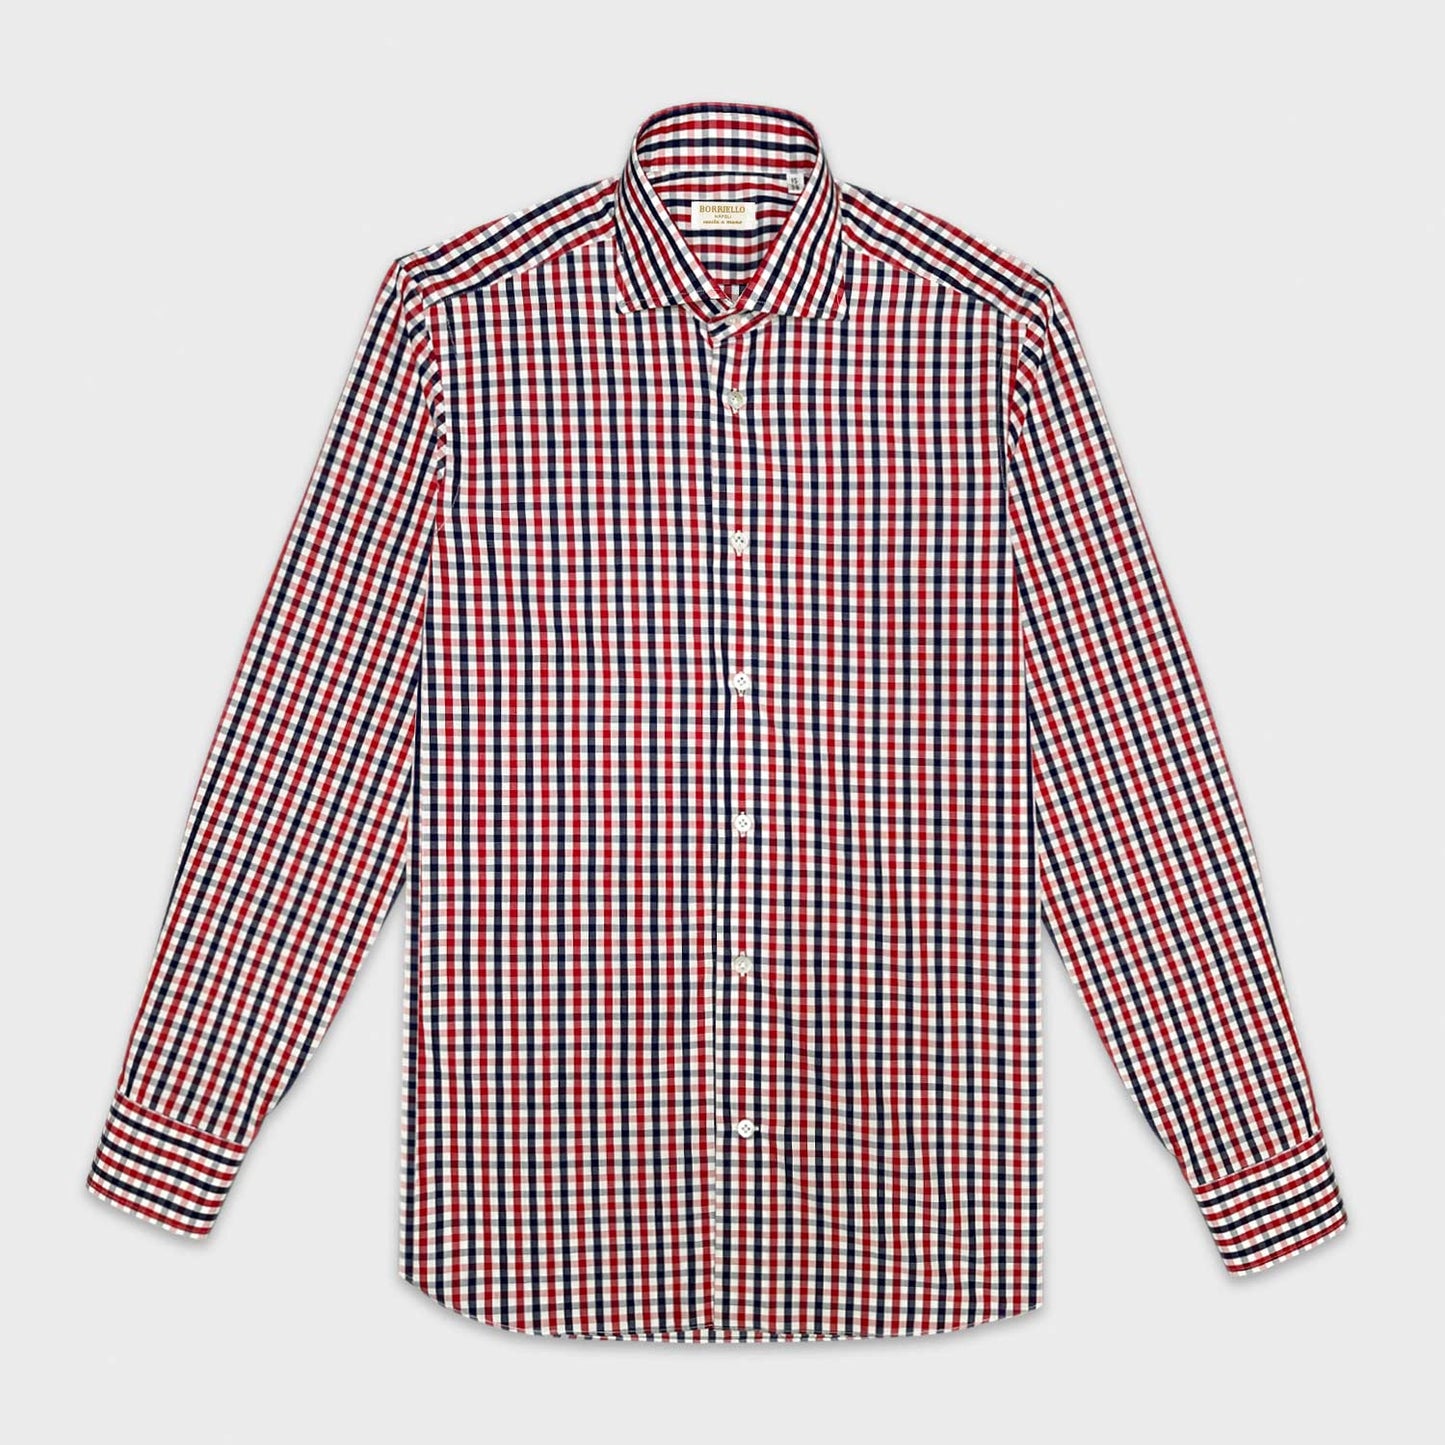 Load image into Gallery viewer, Red and blue checked shirt made with Thomas Mason fabric yarn-dyed in popeline cotton. Handmade shirt by Borriello Napoli exclusive for Wools Boutique Uomo, ideal both for the office or casual outfit with a bright appearance and a soft and smooth hand.
